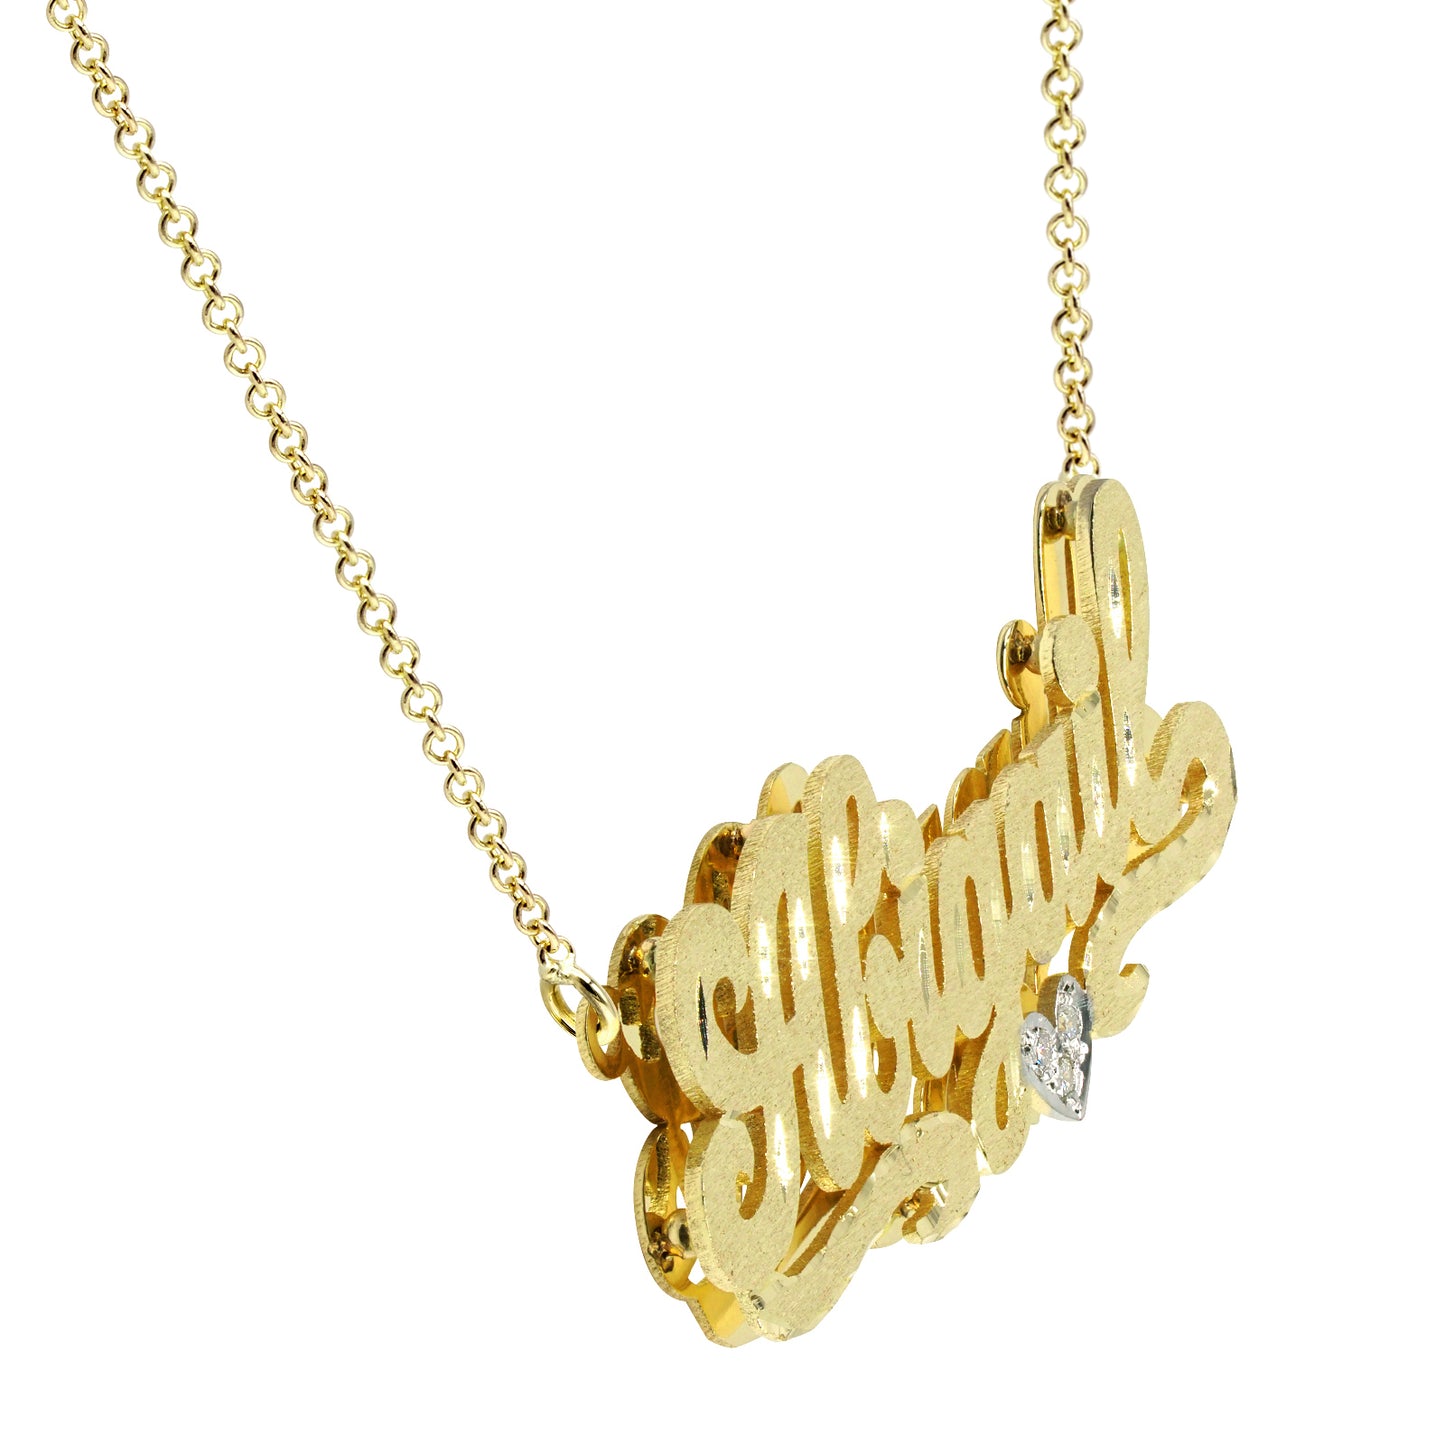 Custom 14kt. Gold Double Plate Name Necklace with Diamond Sparkle | Florentine Finish